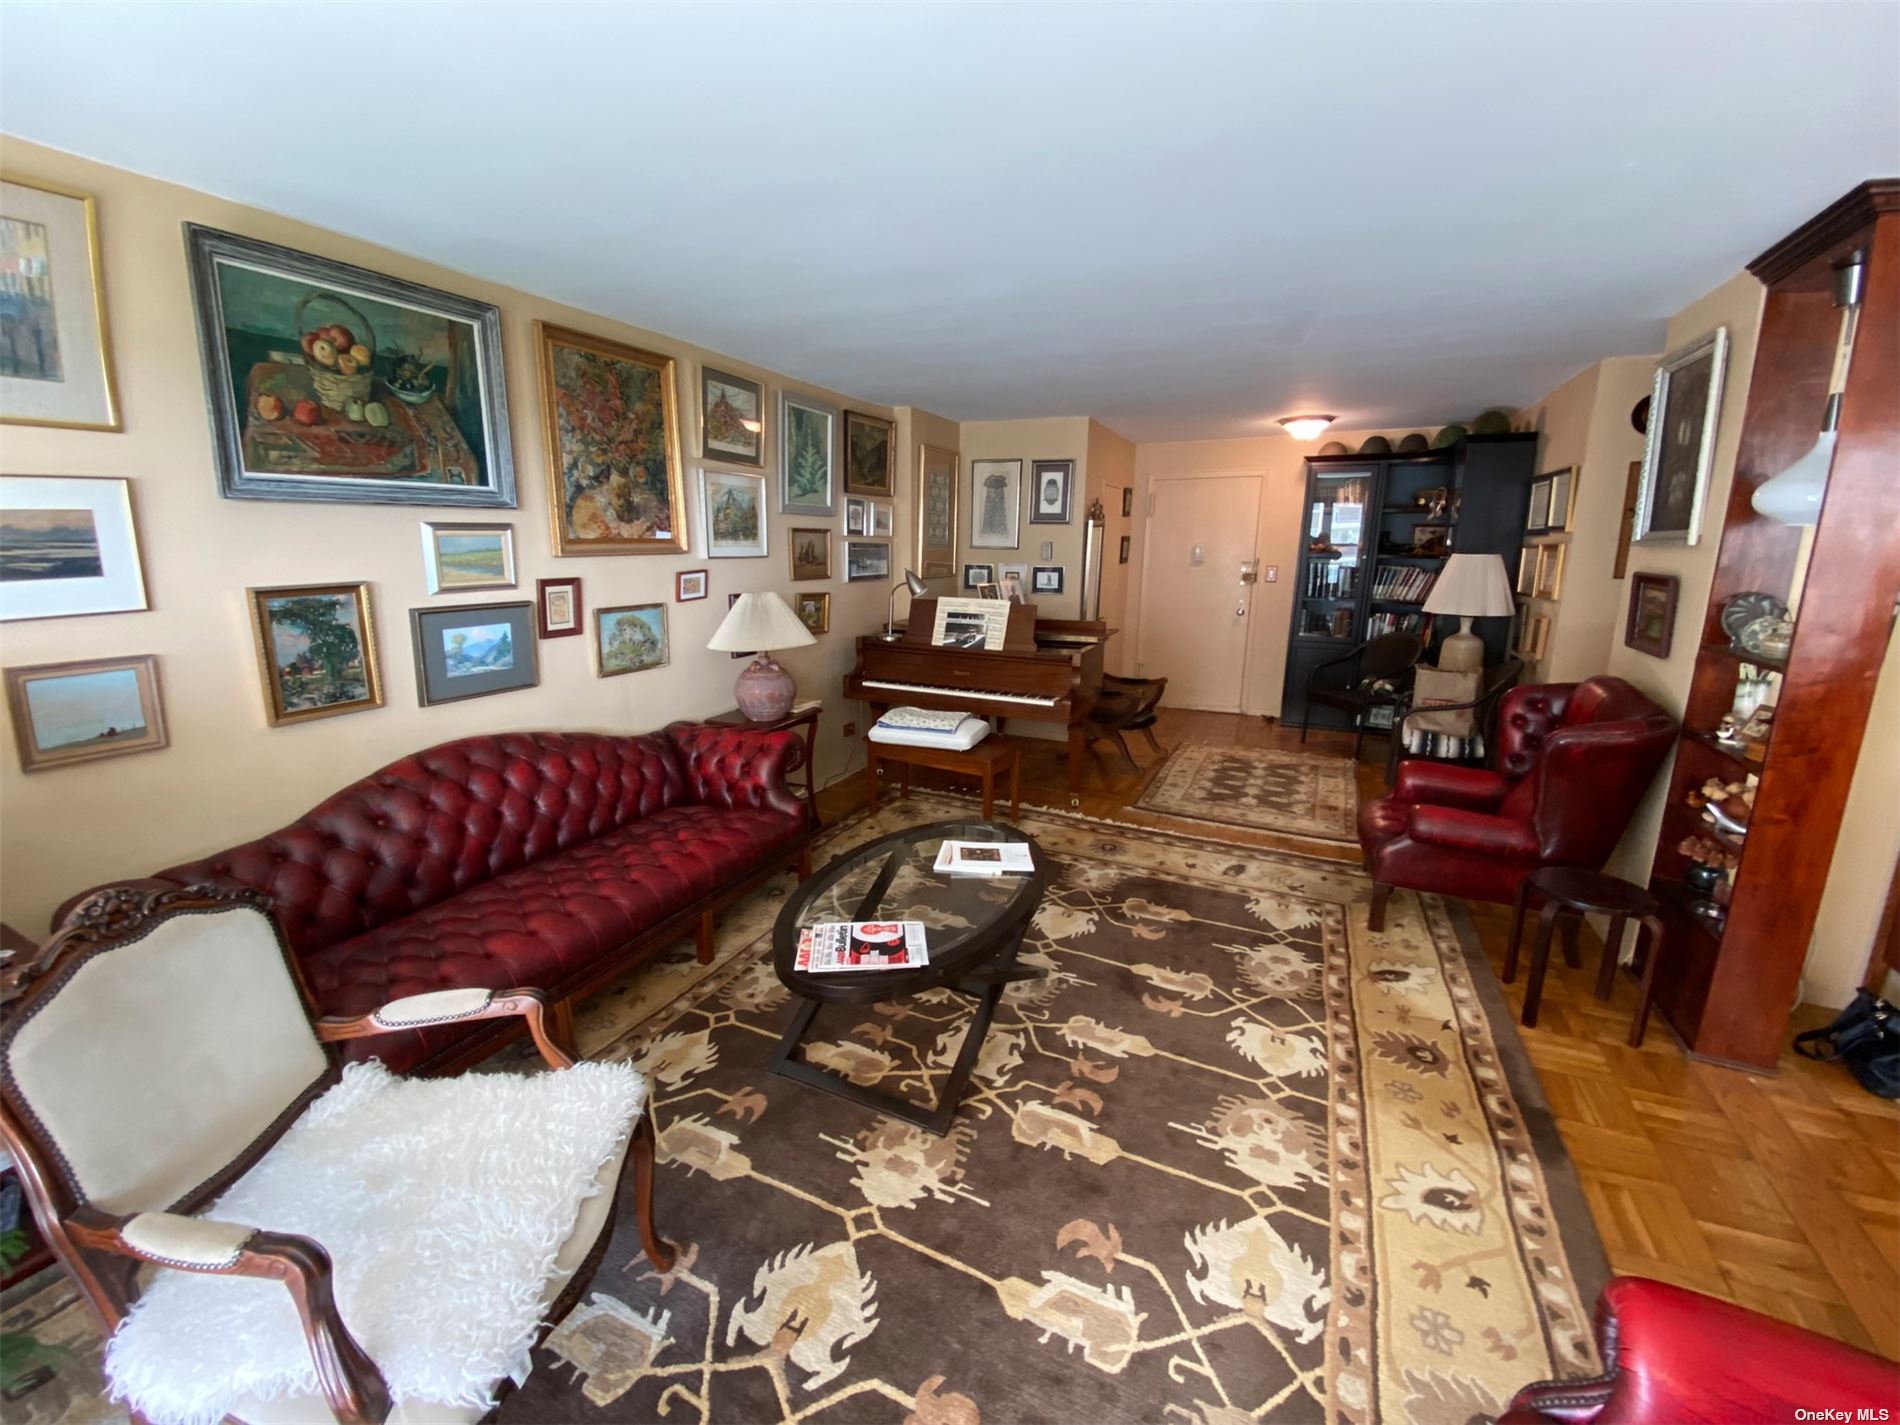 a living room with furniture a couch and paintings on the wall